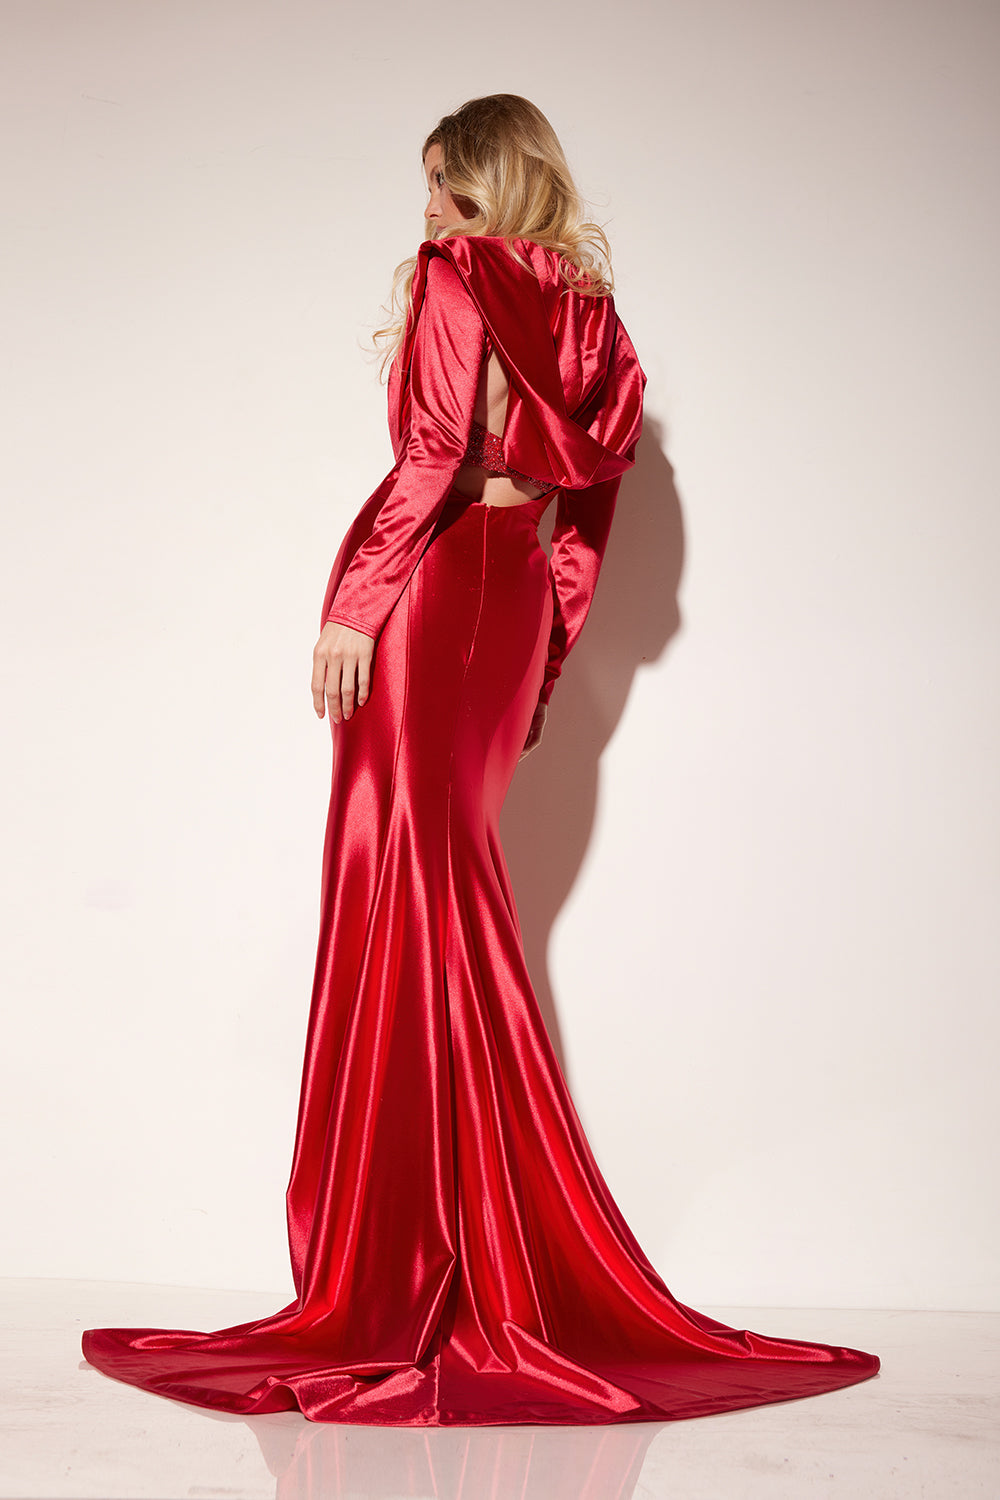 Lucci-Lu-C8120-Sweetheart-Neckline-Open-Back-Sweep-Train-Shimmer-Satin-Fit-N-Flare-Red-Evening-Dress-B-Chic-Fashions-Prom-Dress